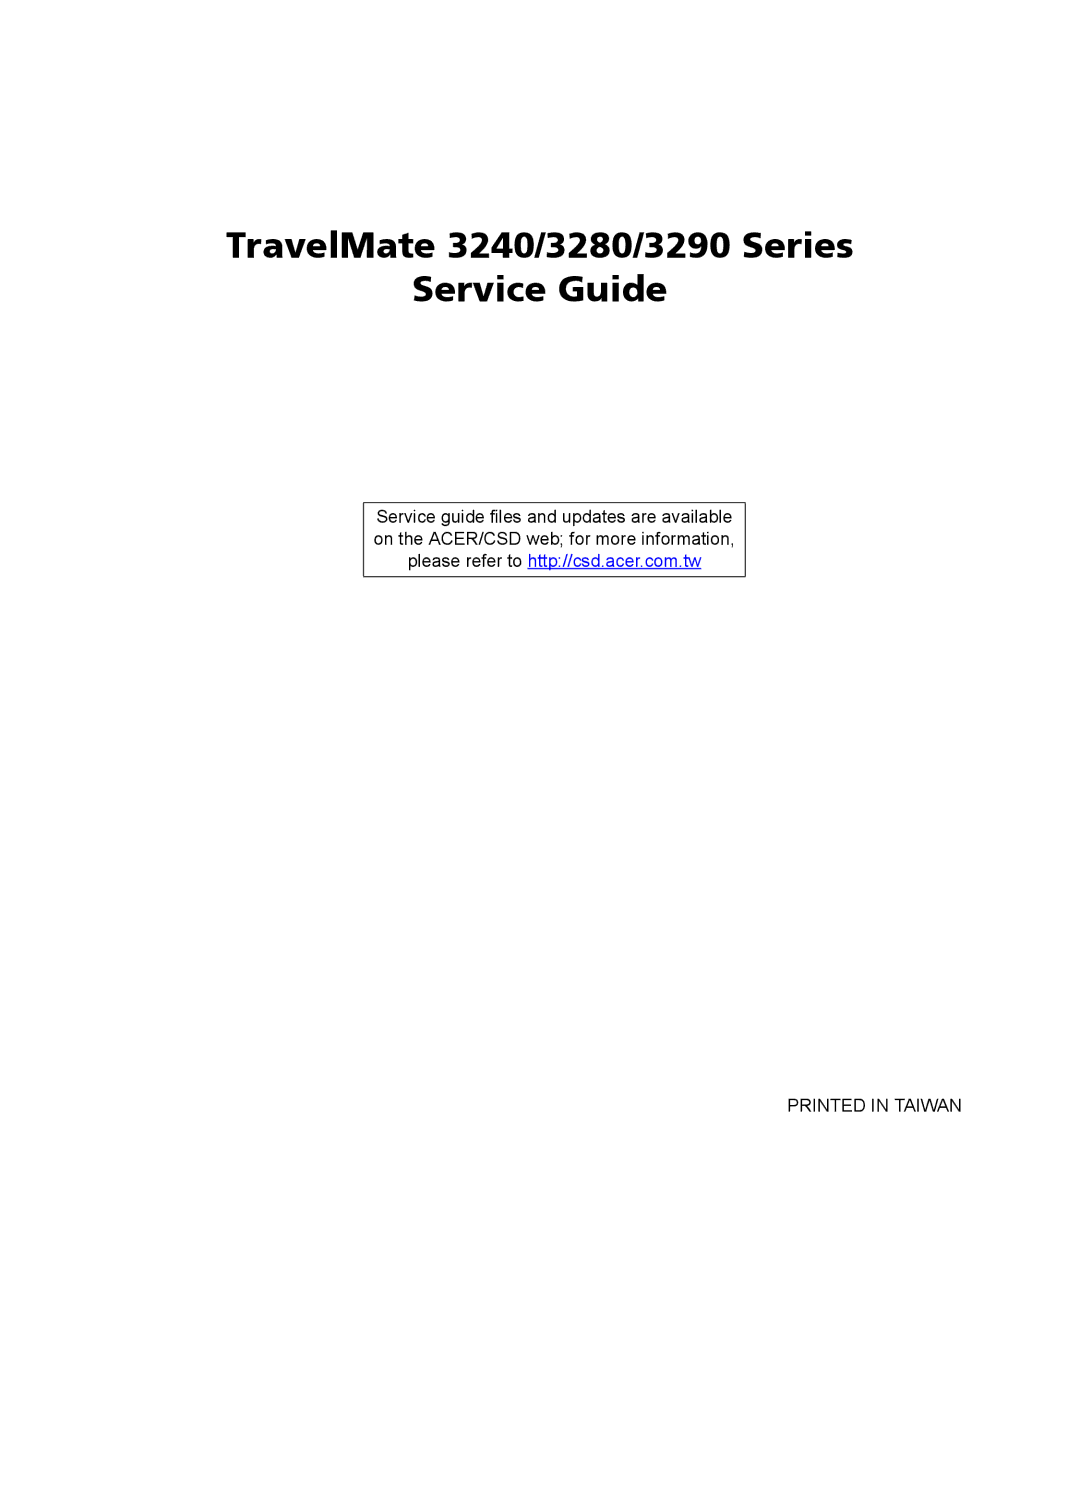 Acer manual TravelMate 3240/3280/3290 Series Service Guide 